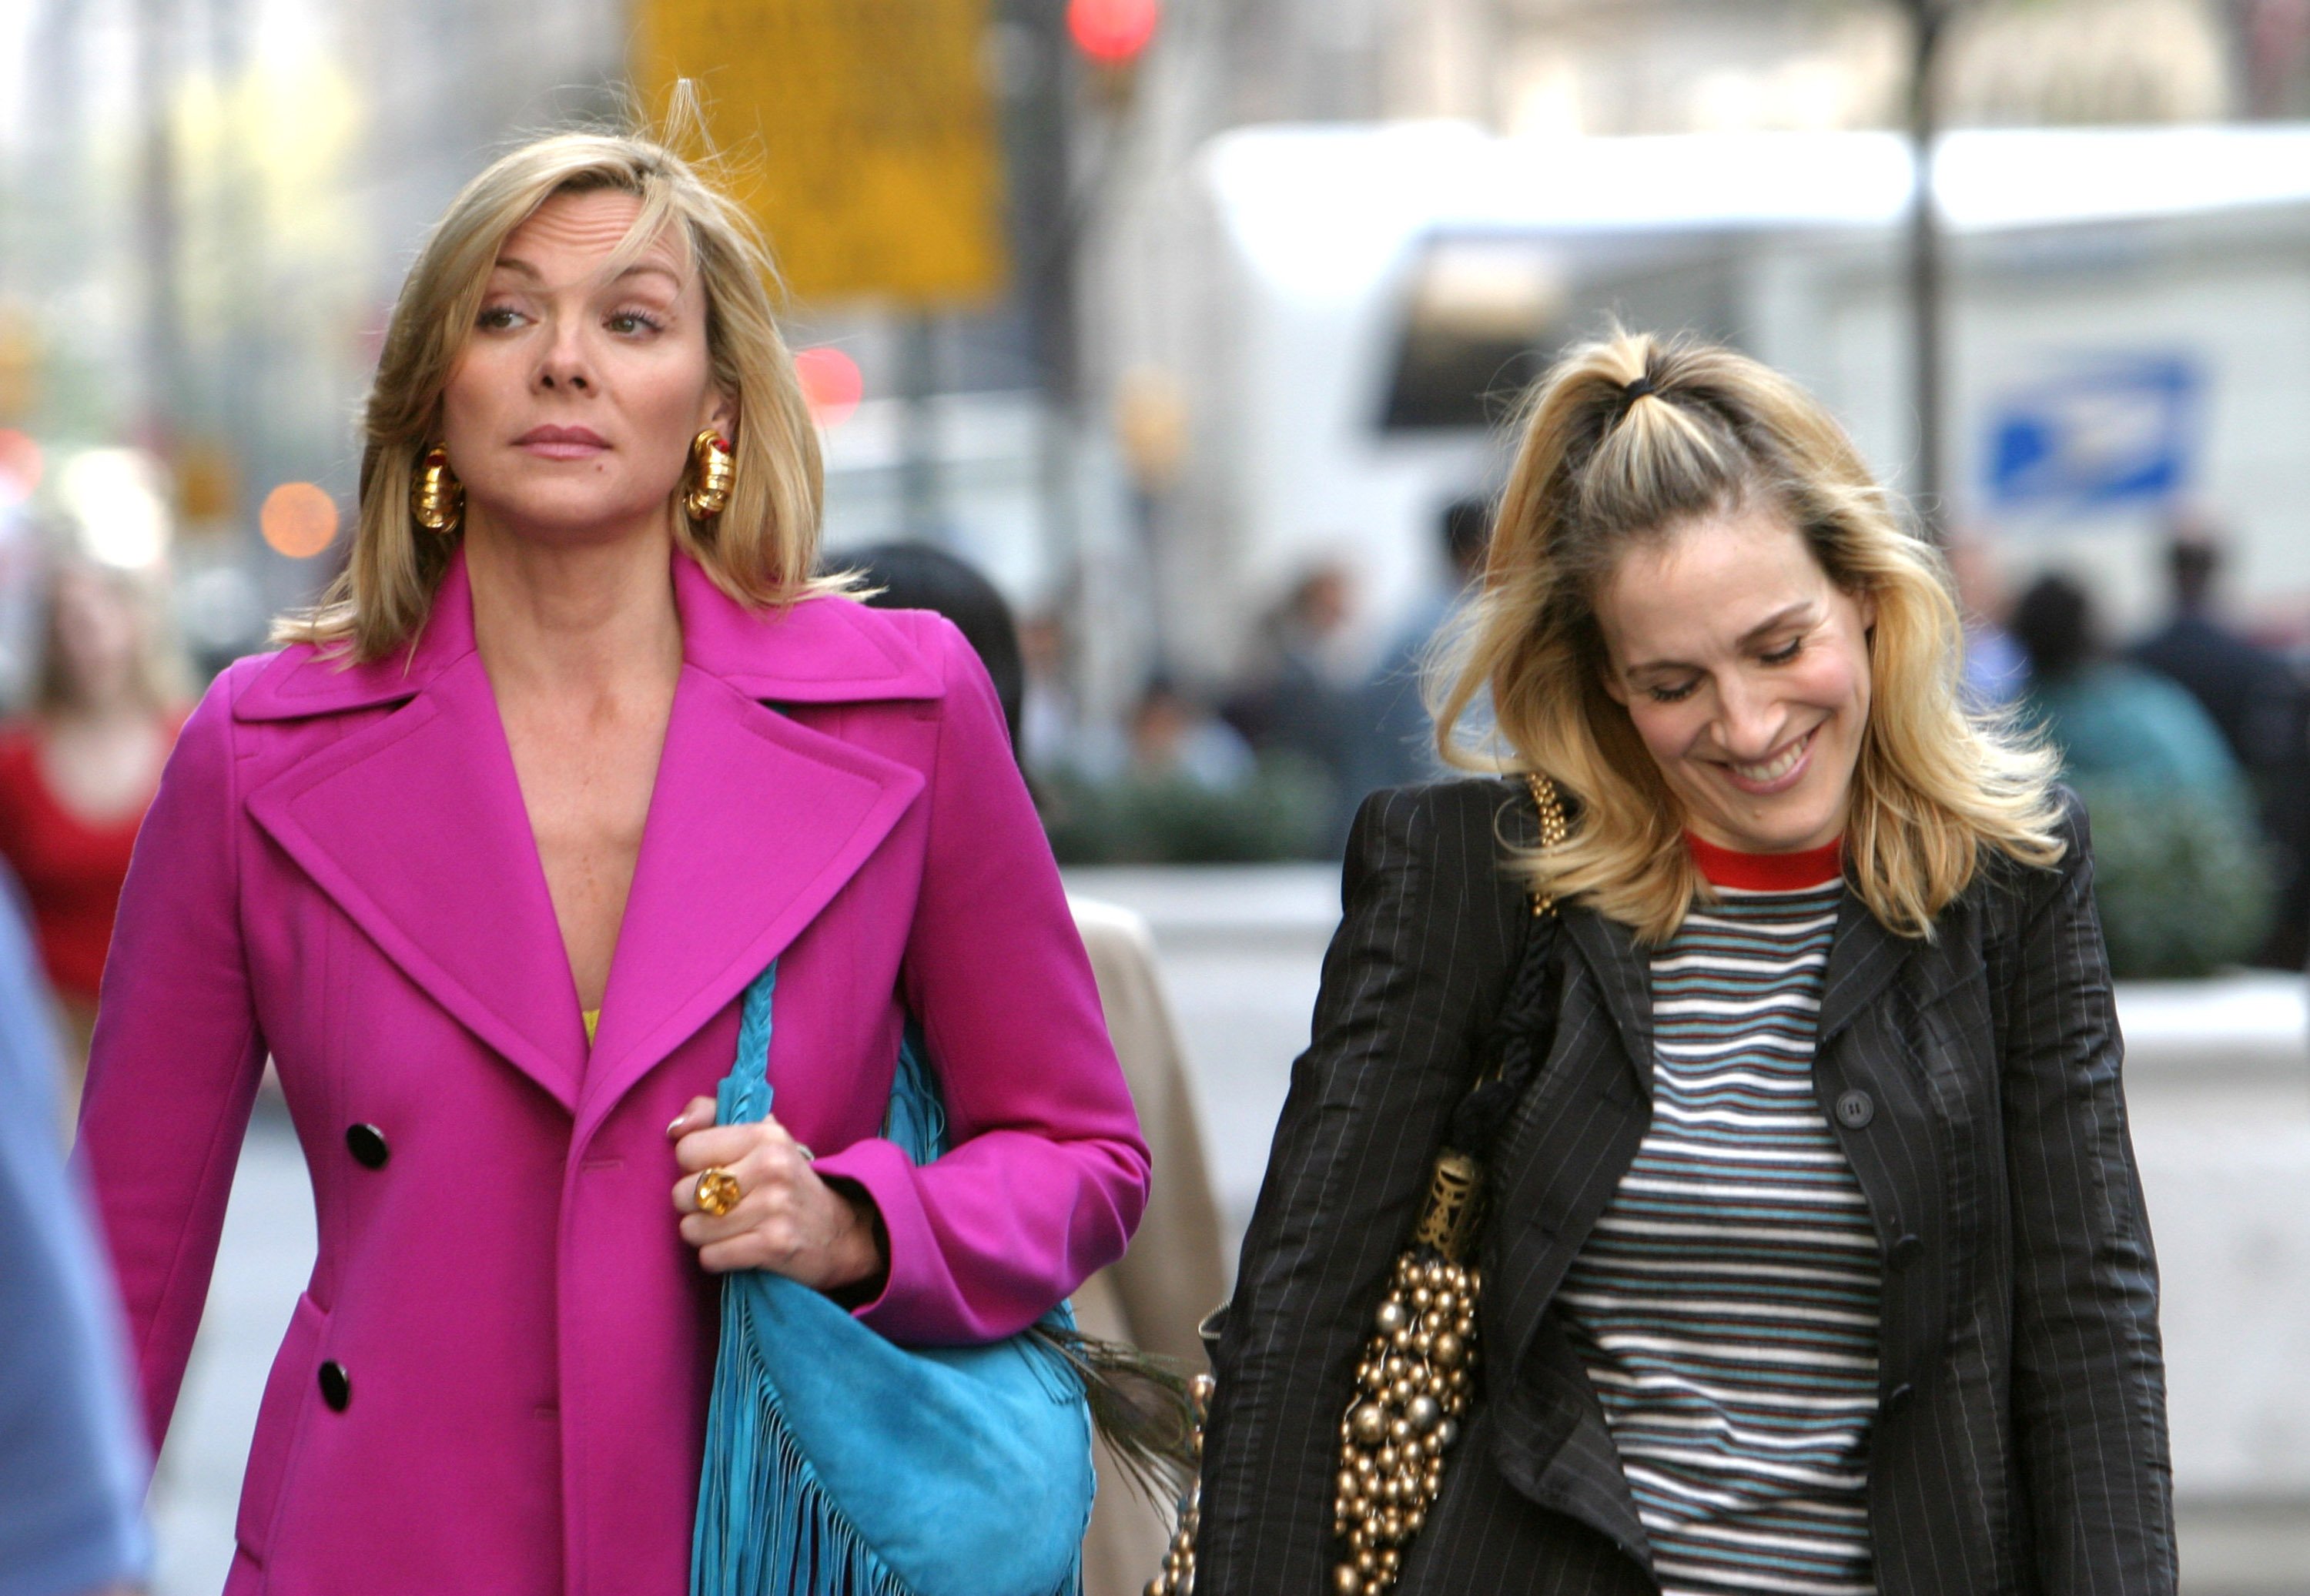 Kim Cattrall and Sarah Jessica Parker are seen on the streets of New York City while filming 'Sex and the City'. Cattrall has opted not to return to the 'Sex and the City' reboot, 'And Just Like That